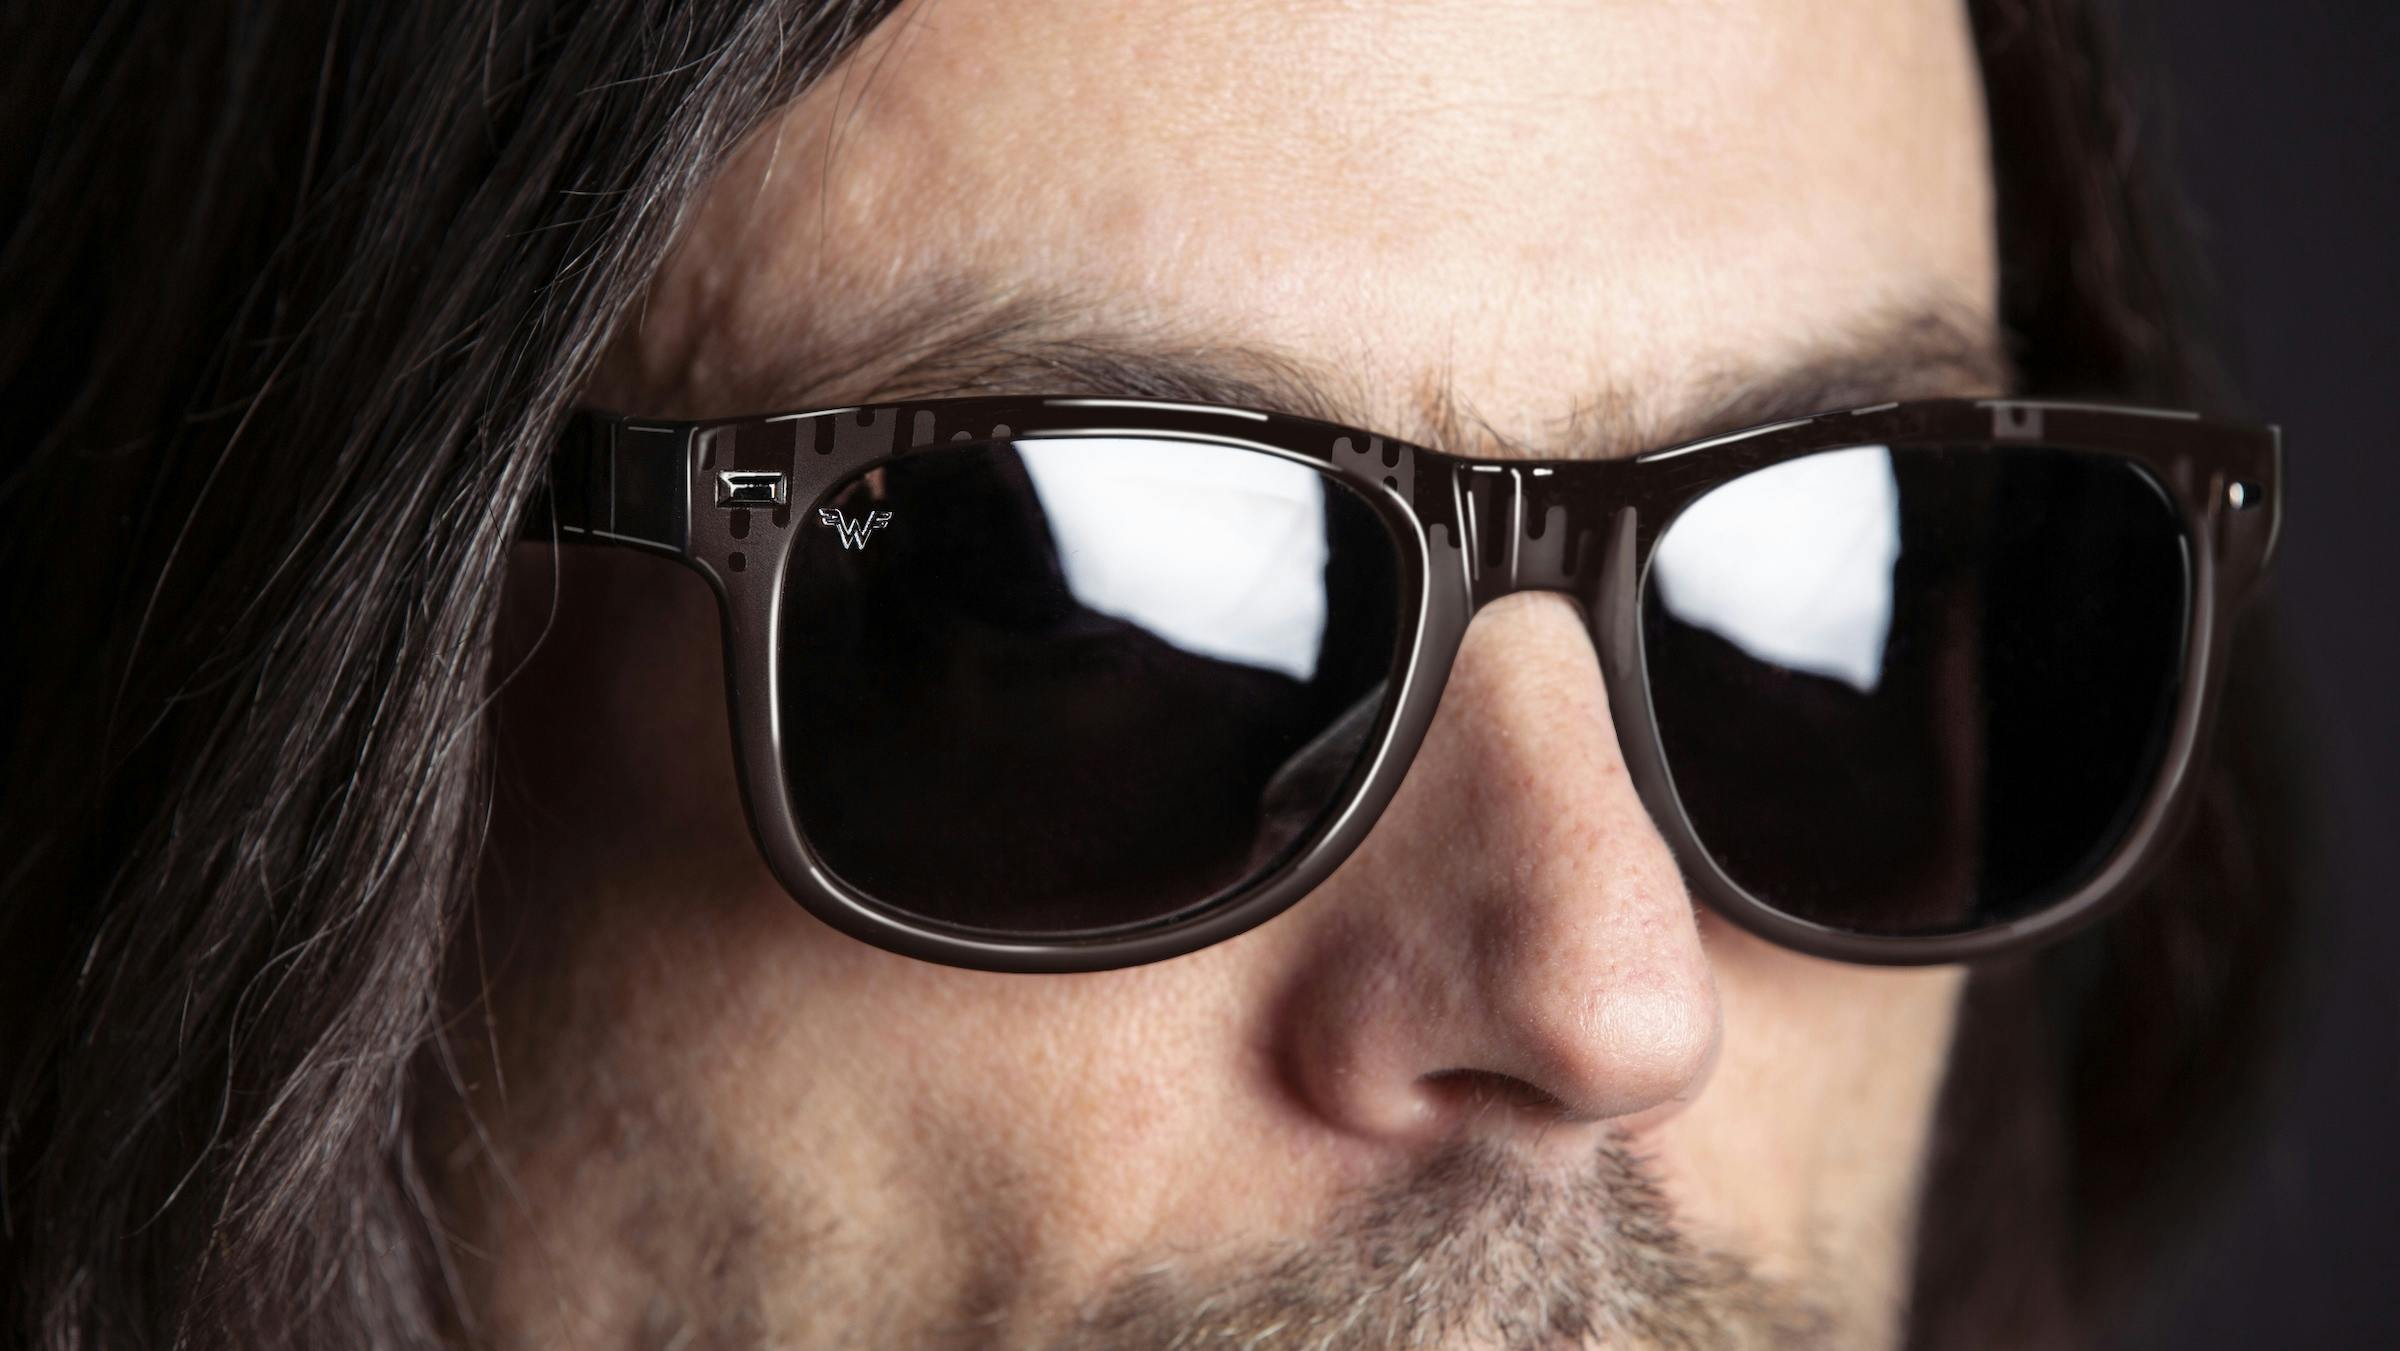 Weezer Have Released Their Own Sunglasses